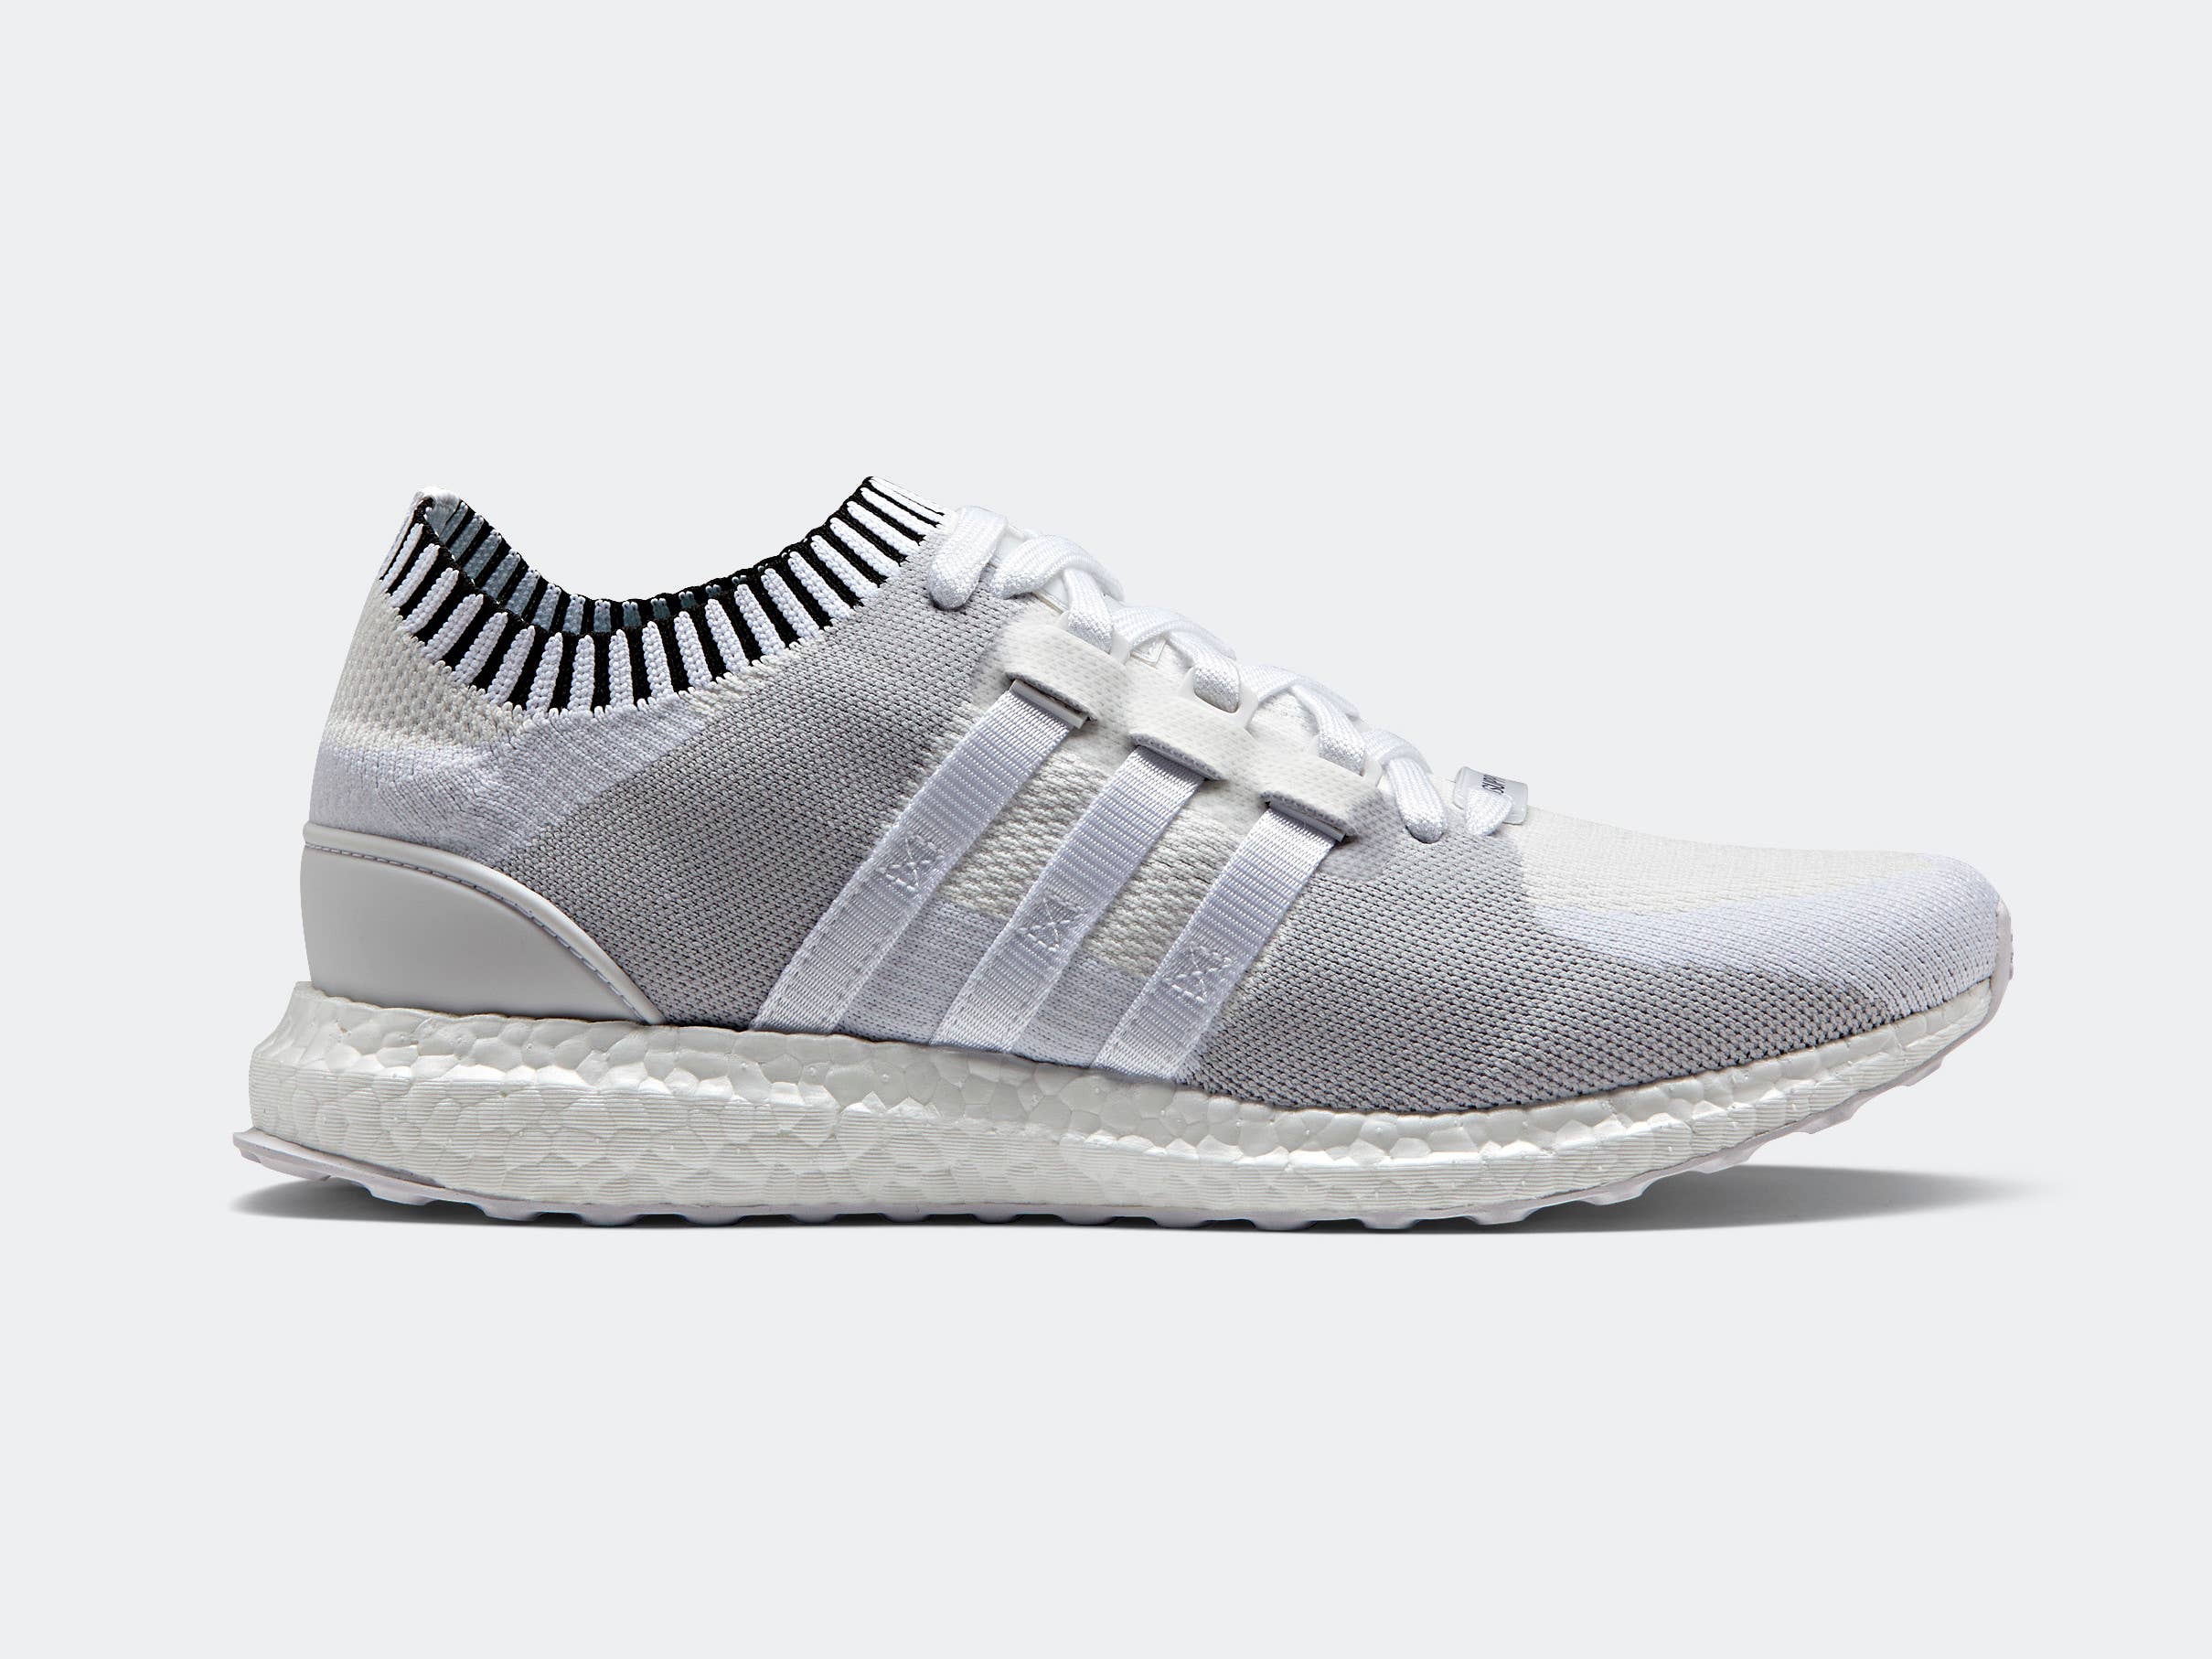 Adidas EQT Support Ultra "Vintage White"